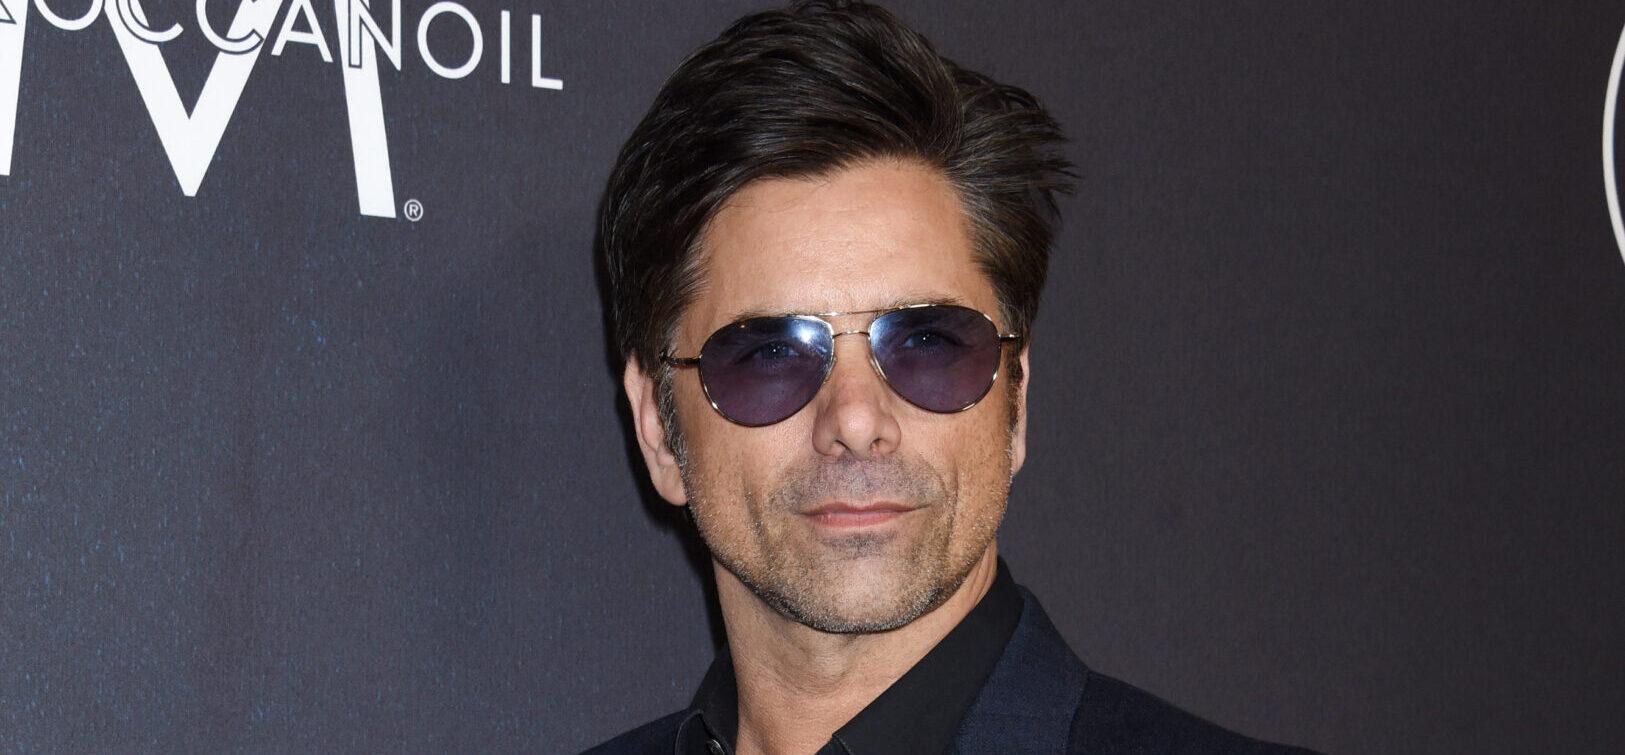 Fans Laugh At John Stamos’s Outfit Choice For Recent Disney Visit